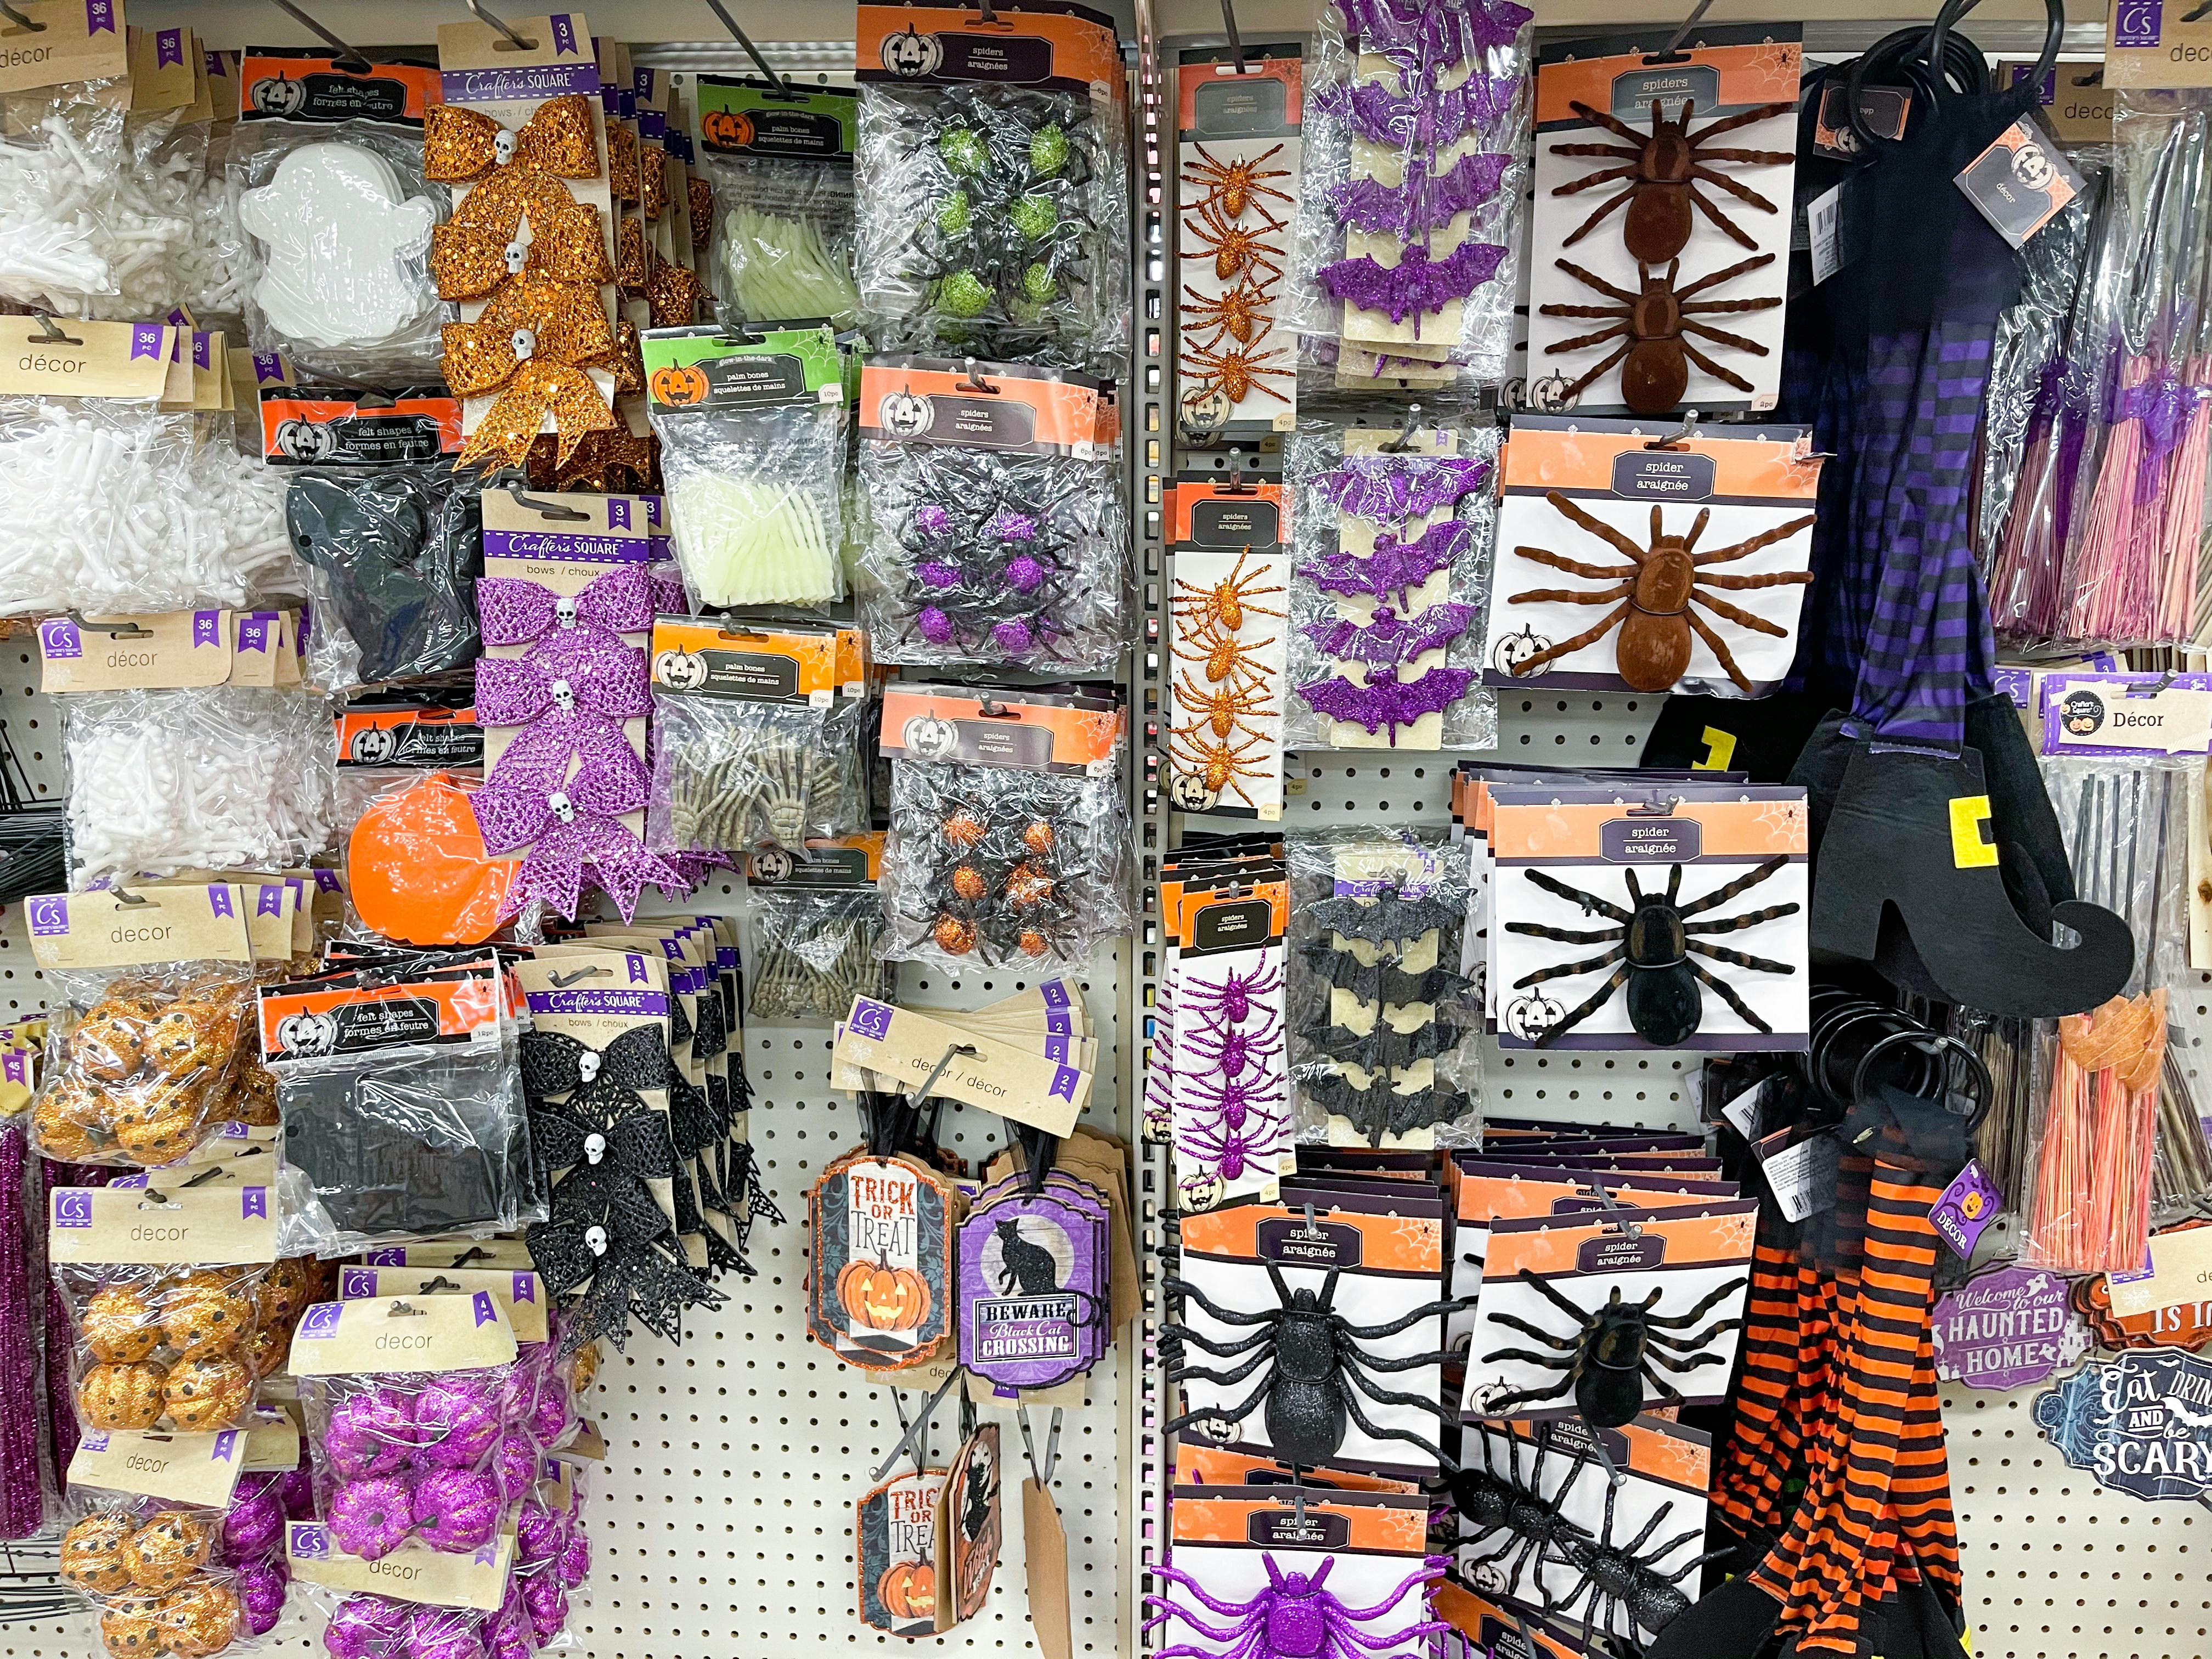 12 Easy DIY Halloween Decorations - The Krazy Coupon Lady